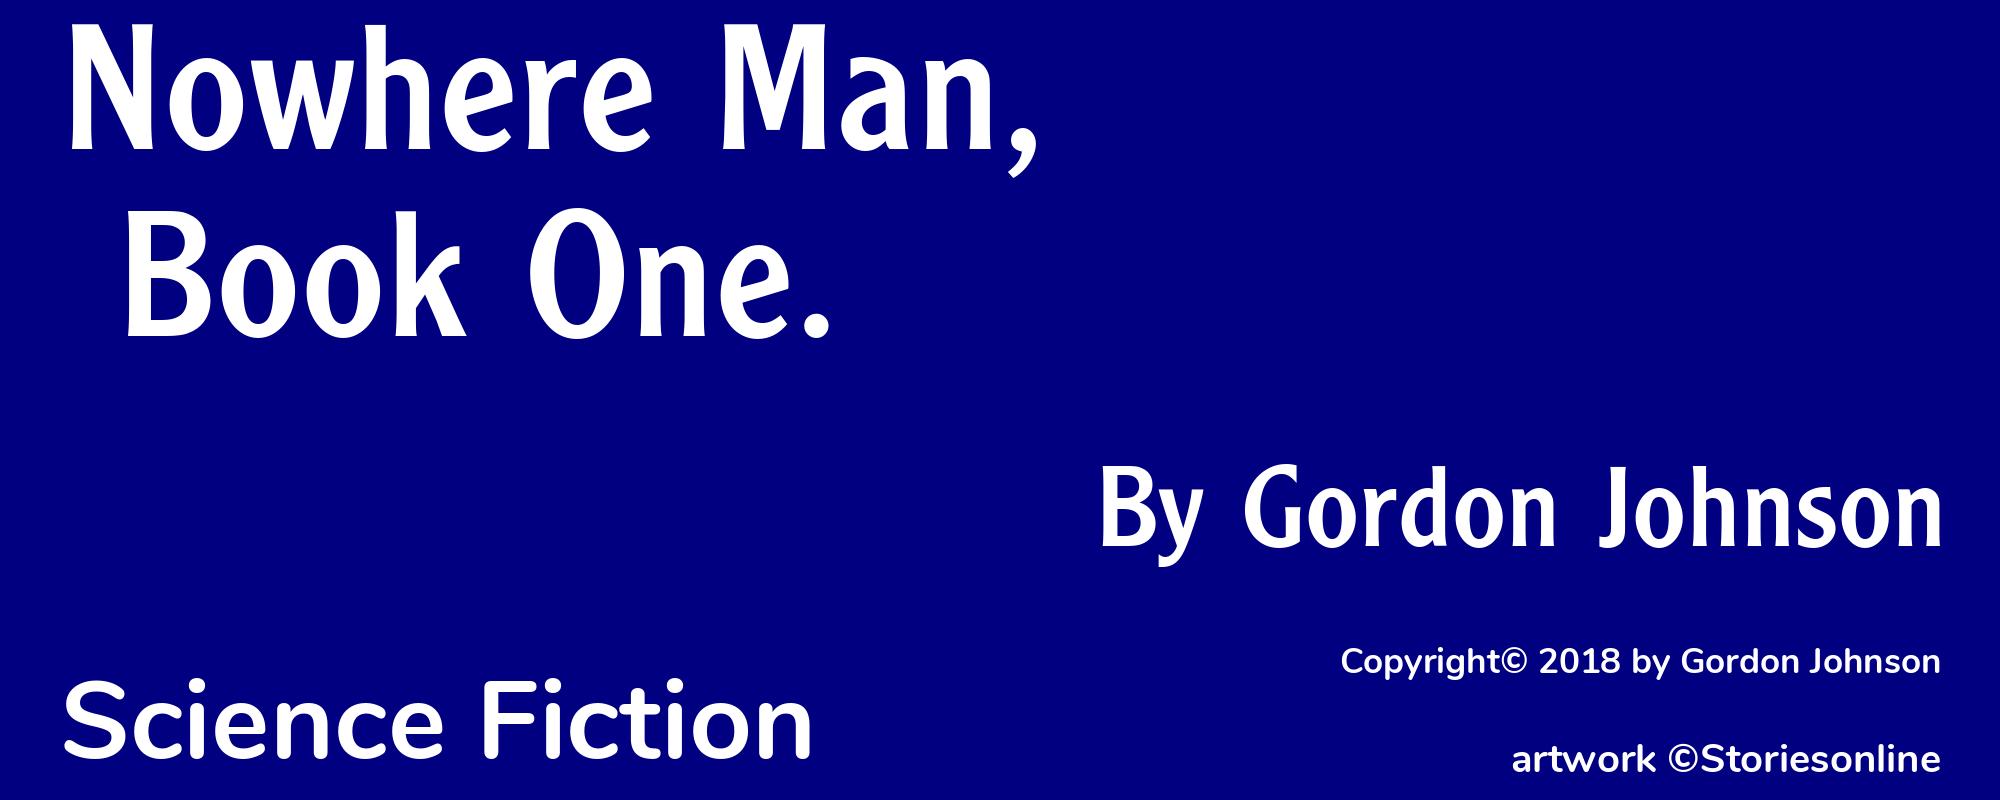 Nowhere Man, Book One. - Cover